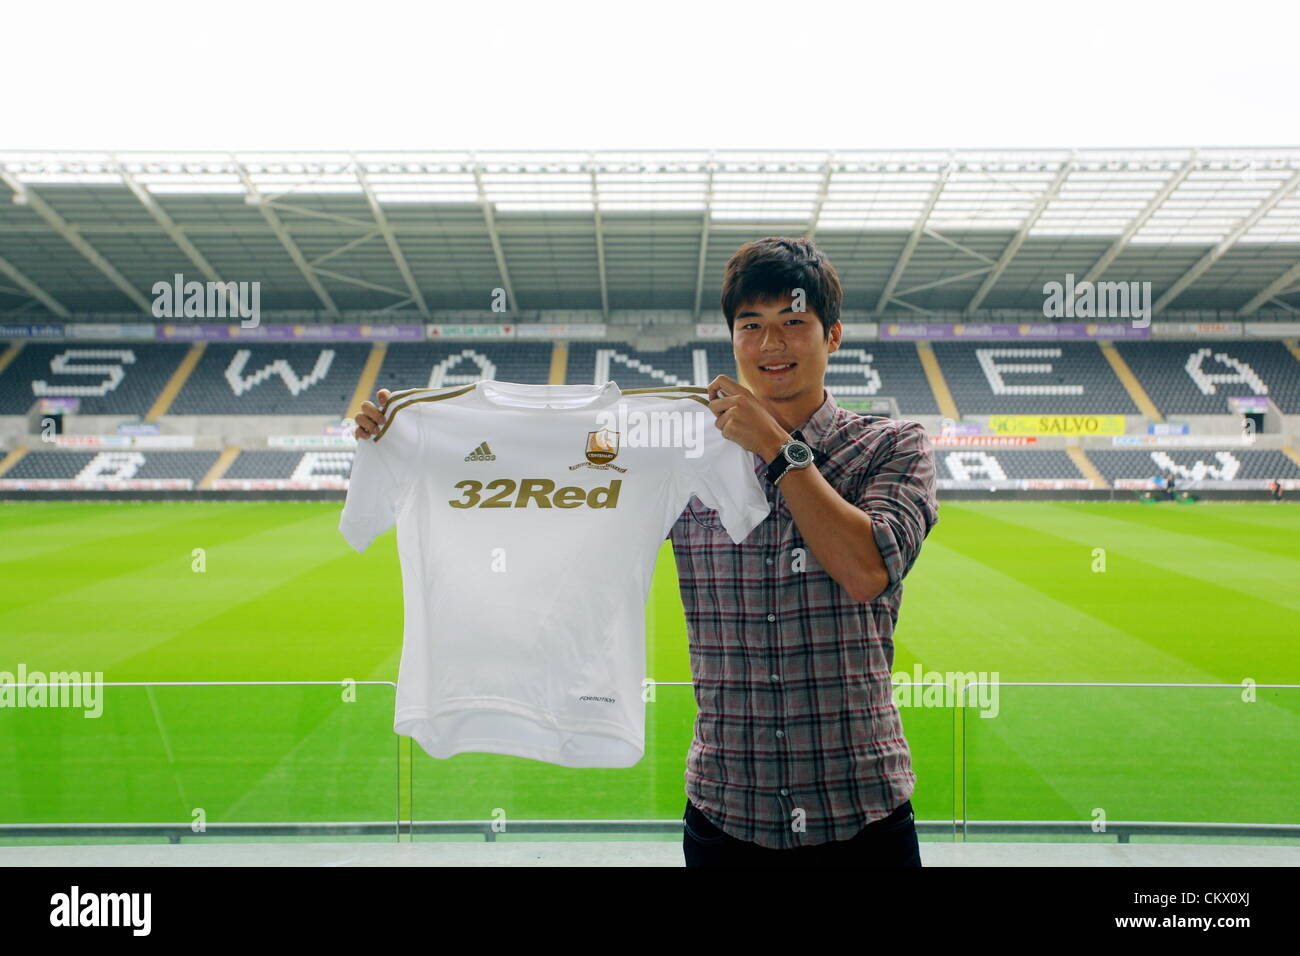 Pictured: New Swansea signing, Ki Sung-Yueng at the Liberty Stadium, south Wales. Friday 24 August 2012  Re: Midfielder Ki Sung-Yeung has completed his almost £6million move to Swansea City FC from Celtic. Stock Photo